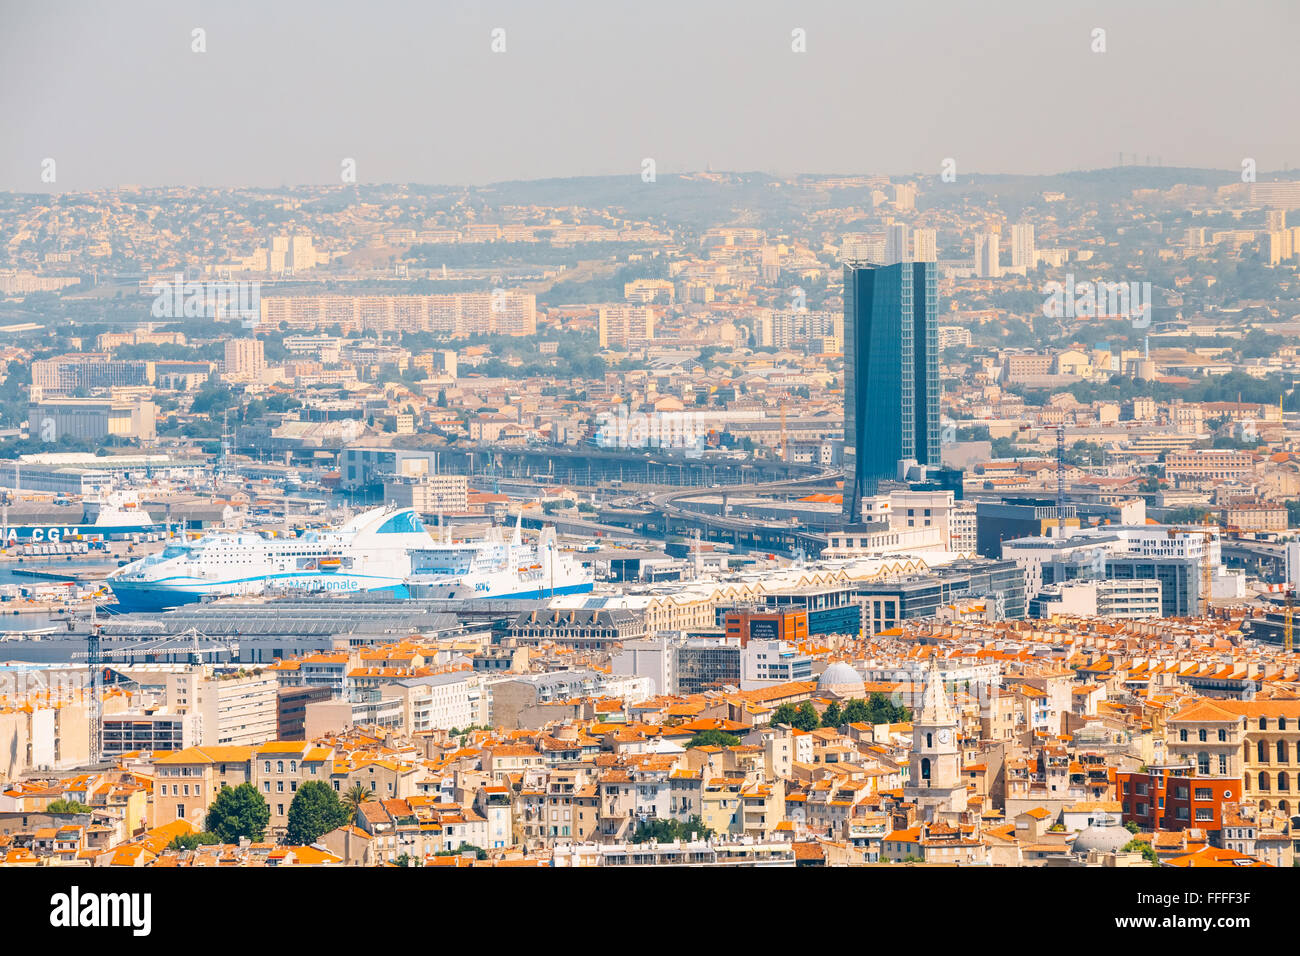 Marseille, France  - June 30, 2015: Urban view, cityscape of Marseille, France. Stock Photo